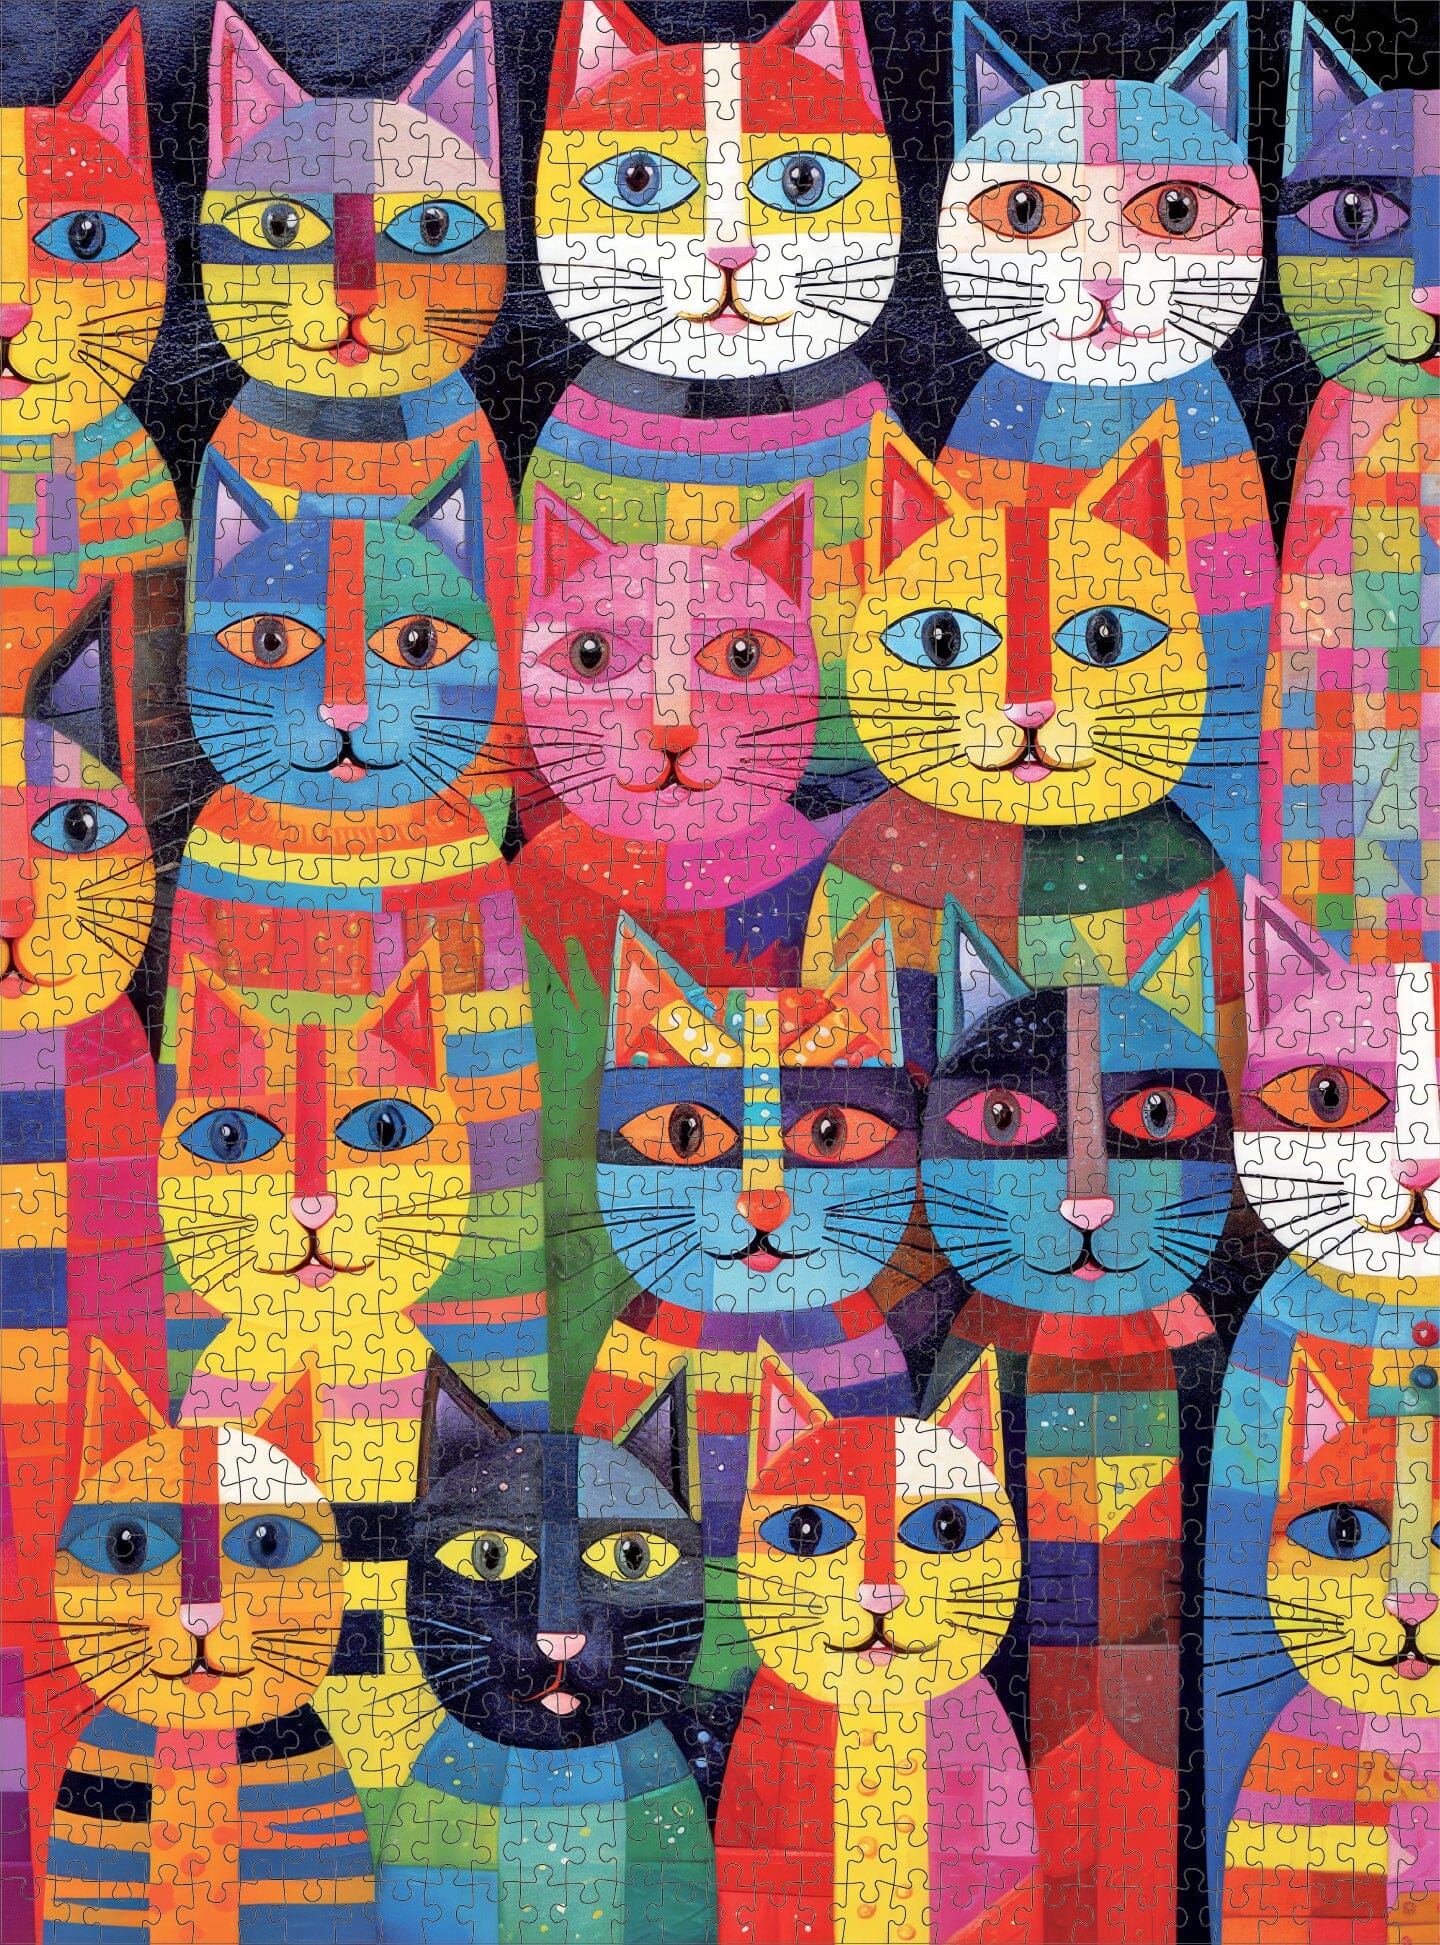 Rainbow Whiskers - Whimsical Cat - 1000 Piece Jigsaw Puzzle Jigsaw Puzzles Cross & Glory